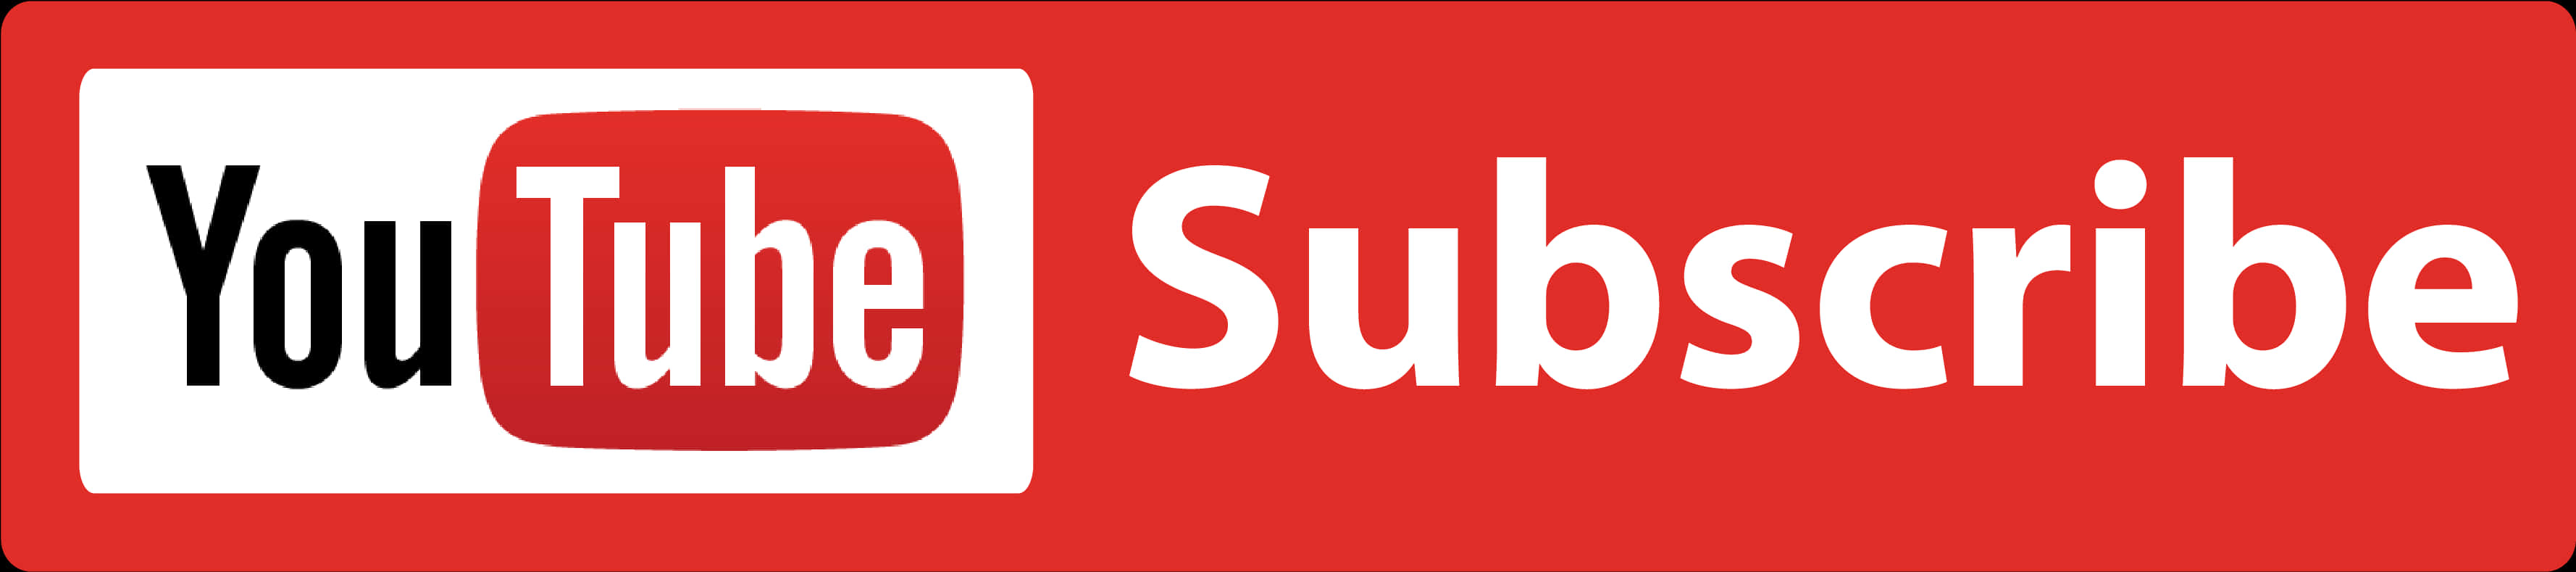 You Tube Subscribe Button Banner PNG image